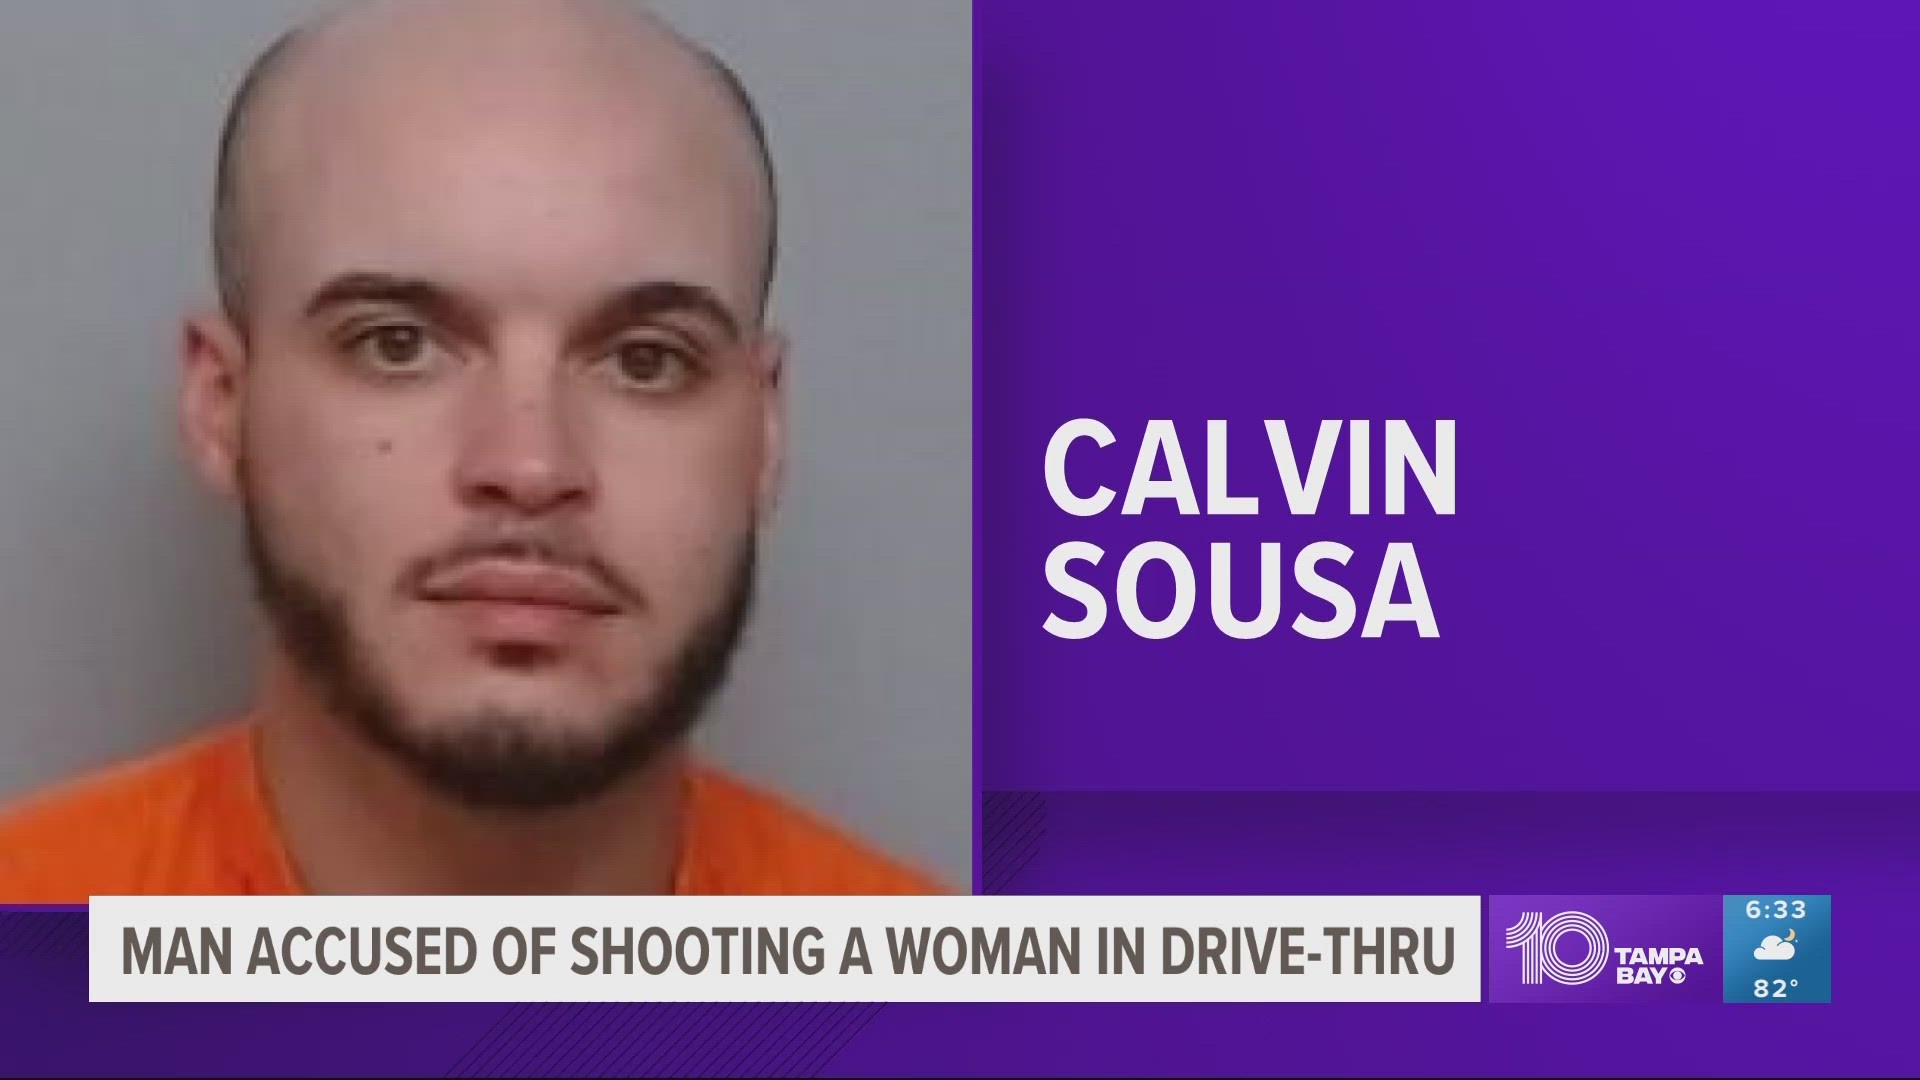 Calvin Sousa was charged with attempted first degree murder and shooting into an occupied vehicle.